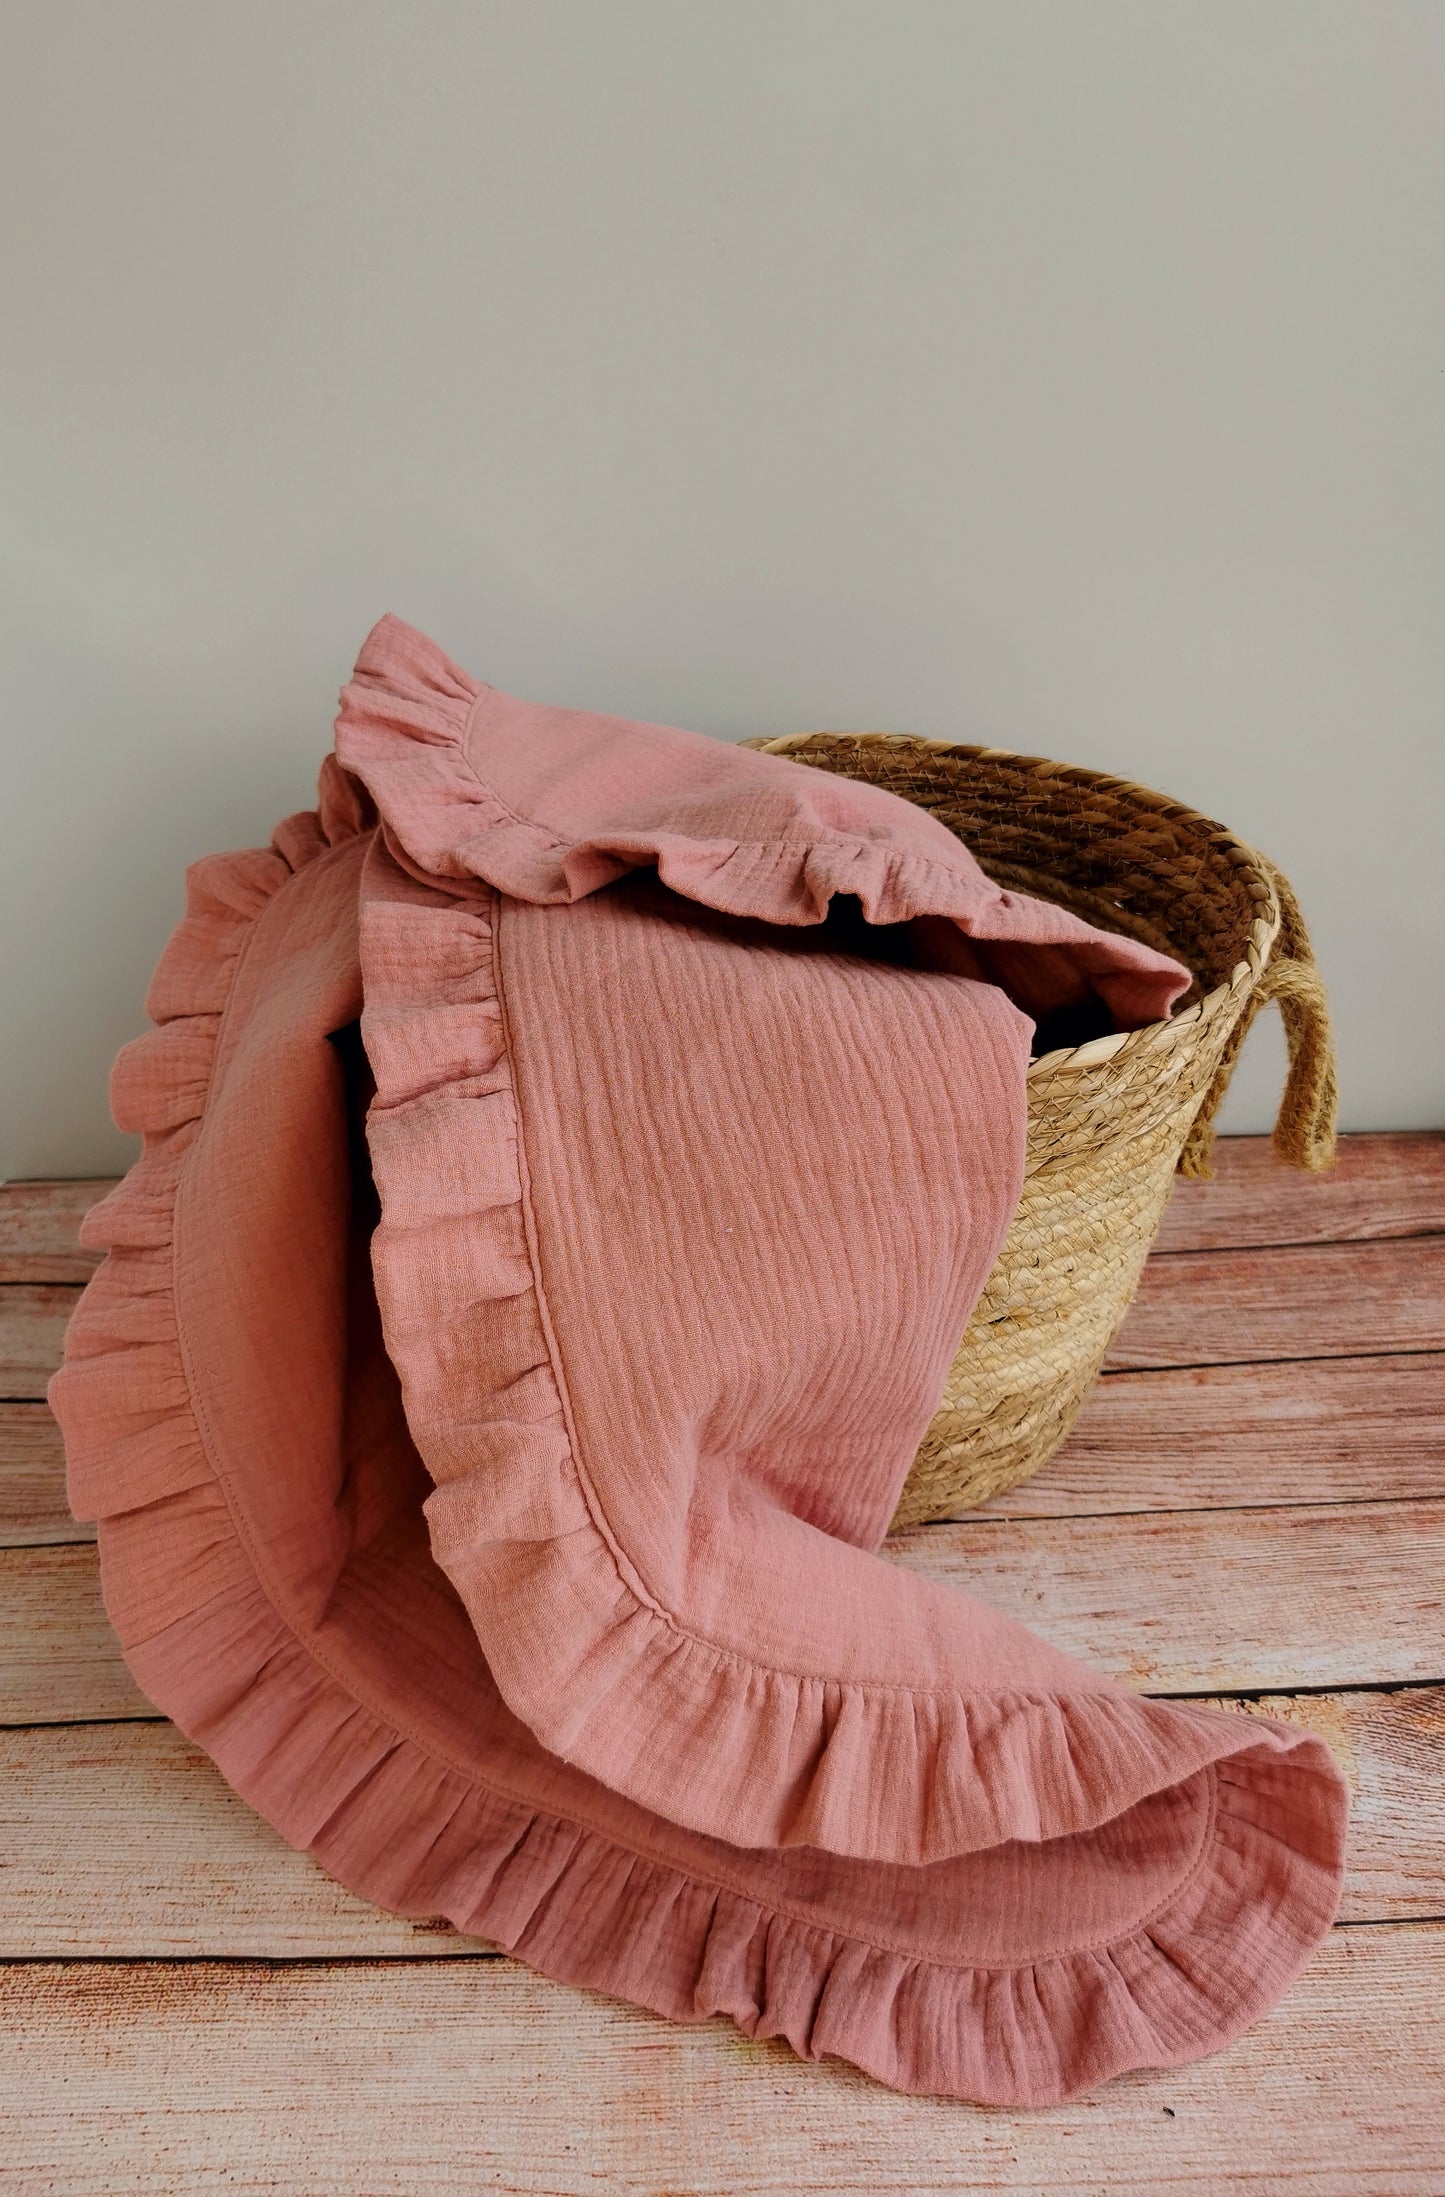 Padded Muslin baby blanket with ruffles - Old Pink